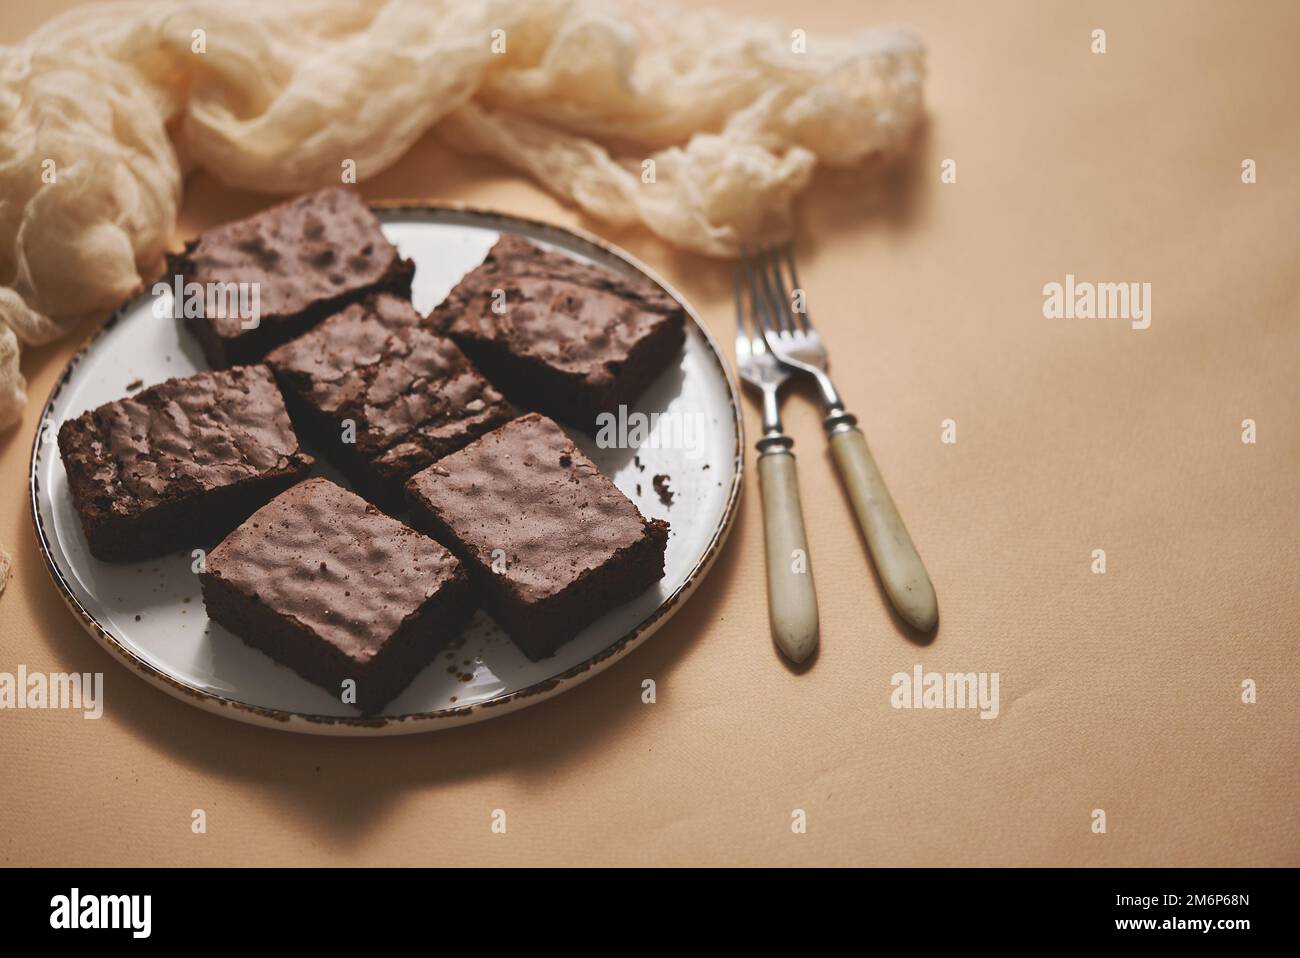 Homemade chocolate brownies served on white plate over beige background Stock Photo